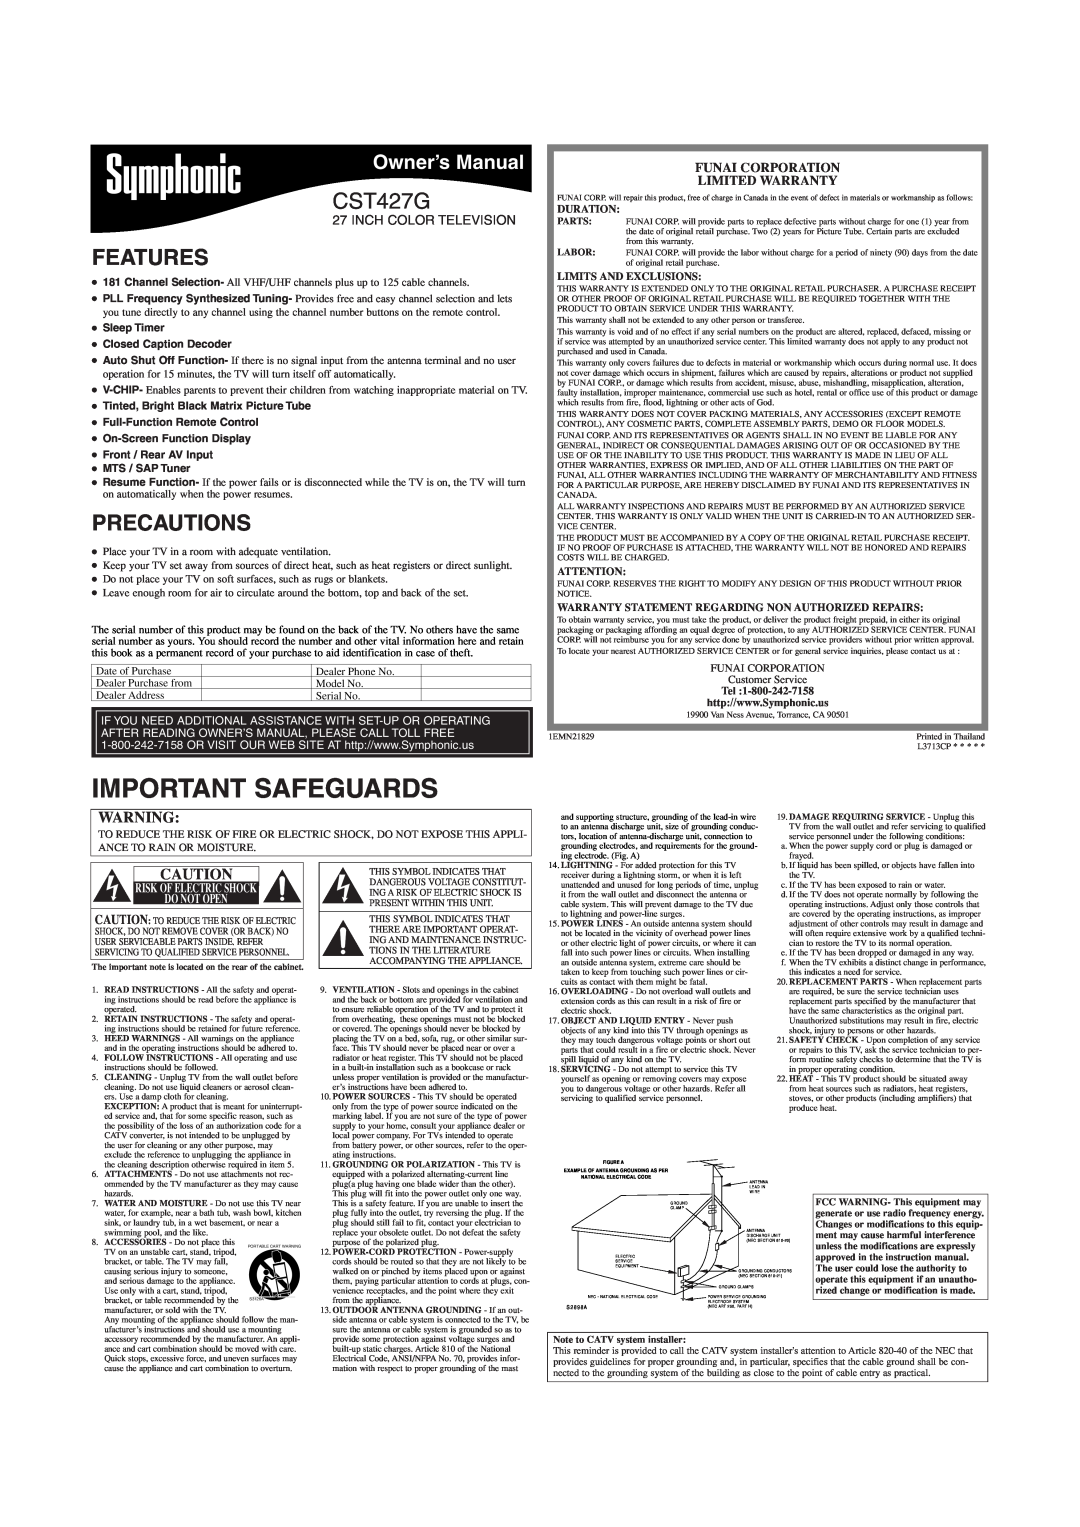 Symphonic CST427G owner manual Features, Precautions, Duration, Limits And Exclusions, Important Safeguards 